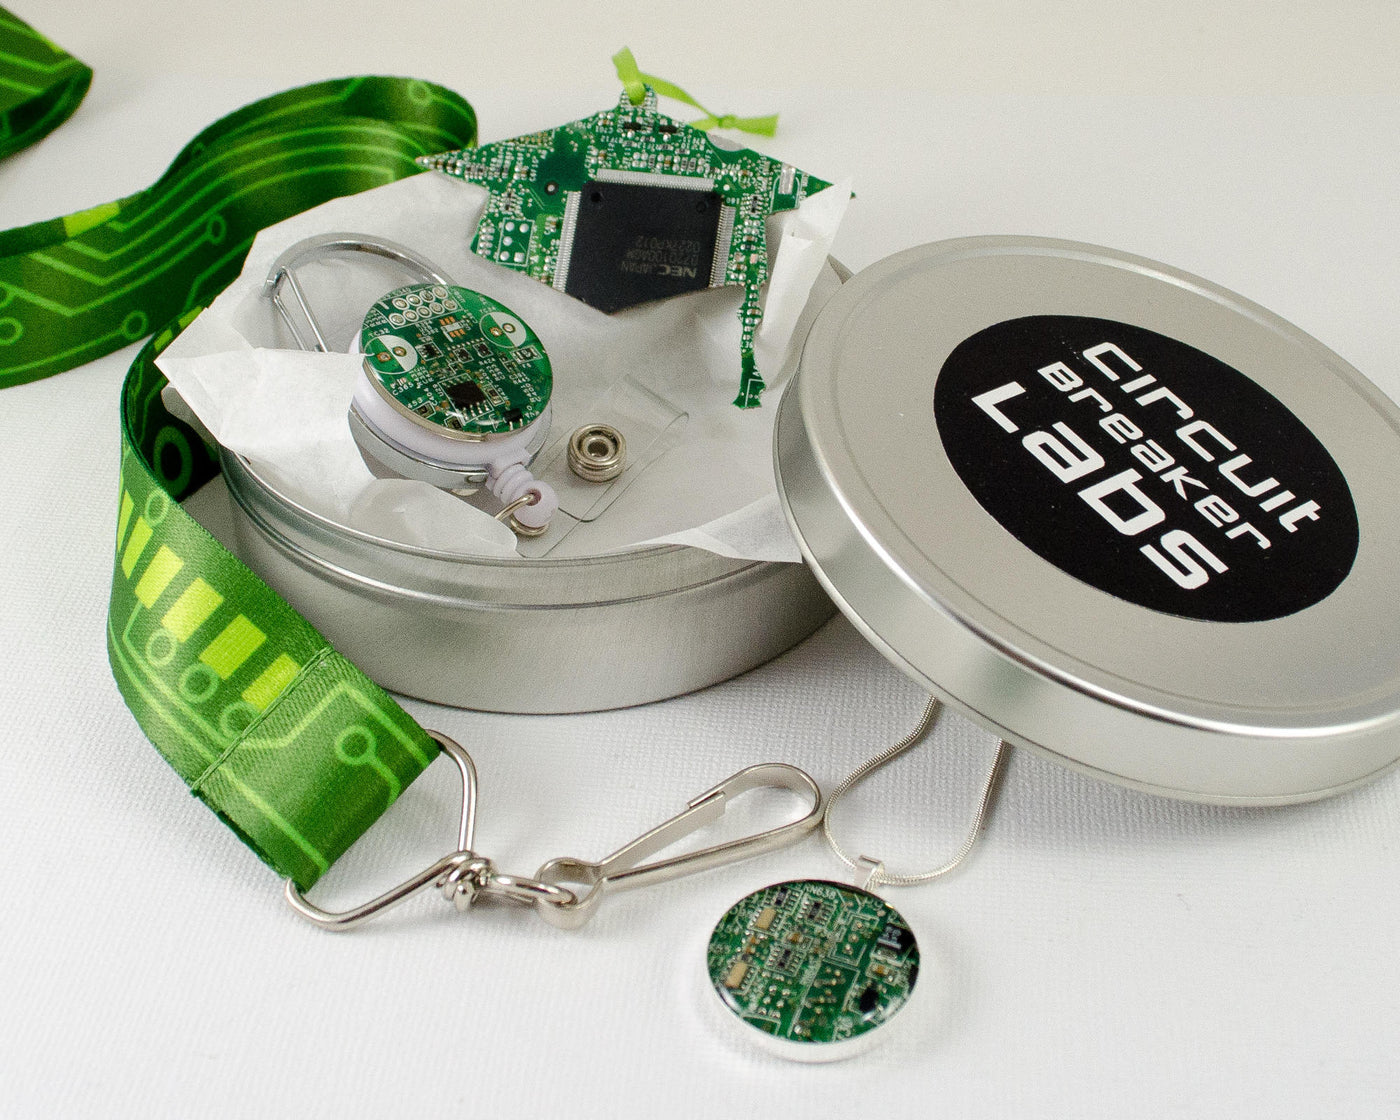 graduation gift set with cap ornament, necklace, lanyard, and badge reel